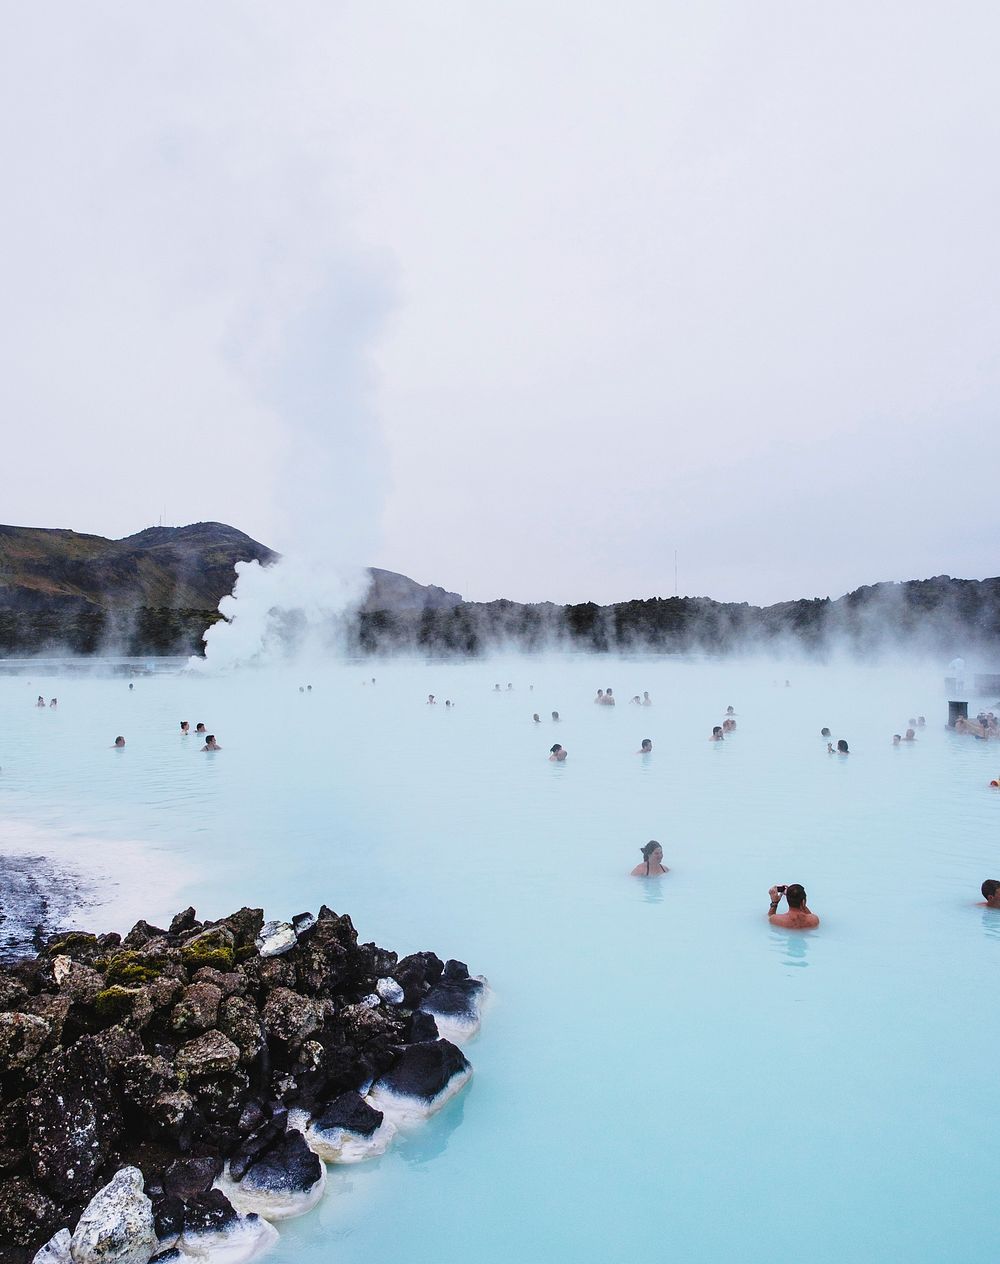 People swimming in hot spring. Original public domain image from Wikimedia Commons